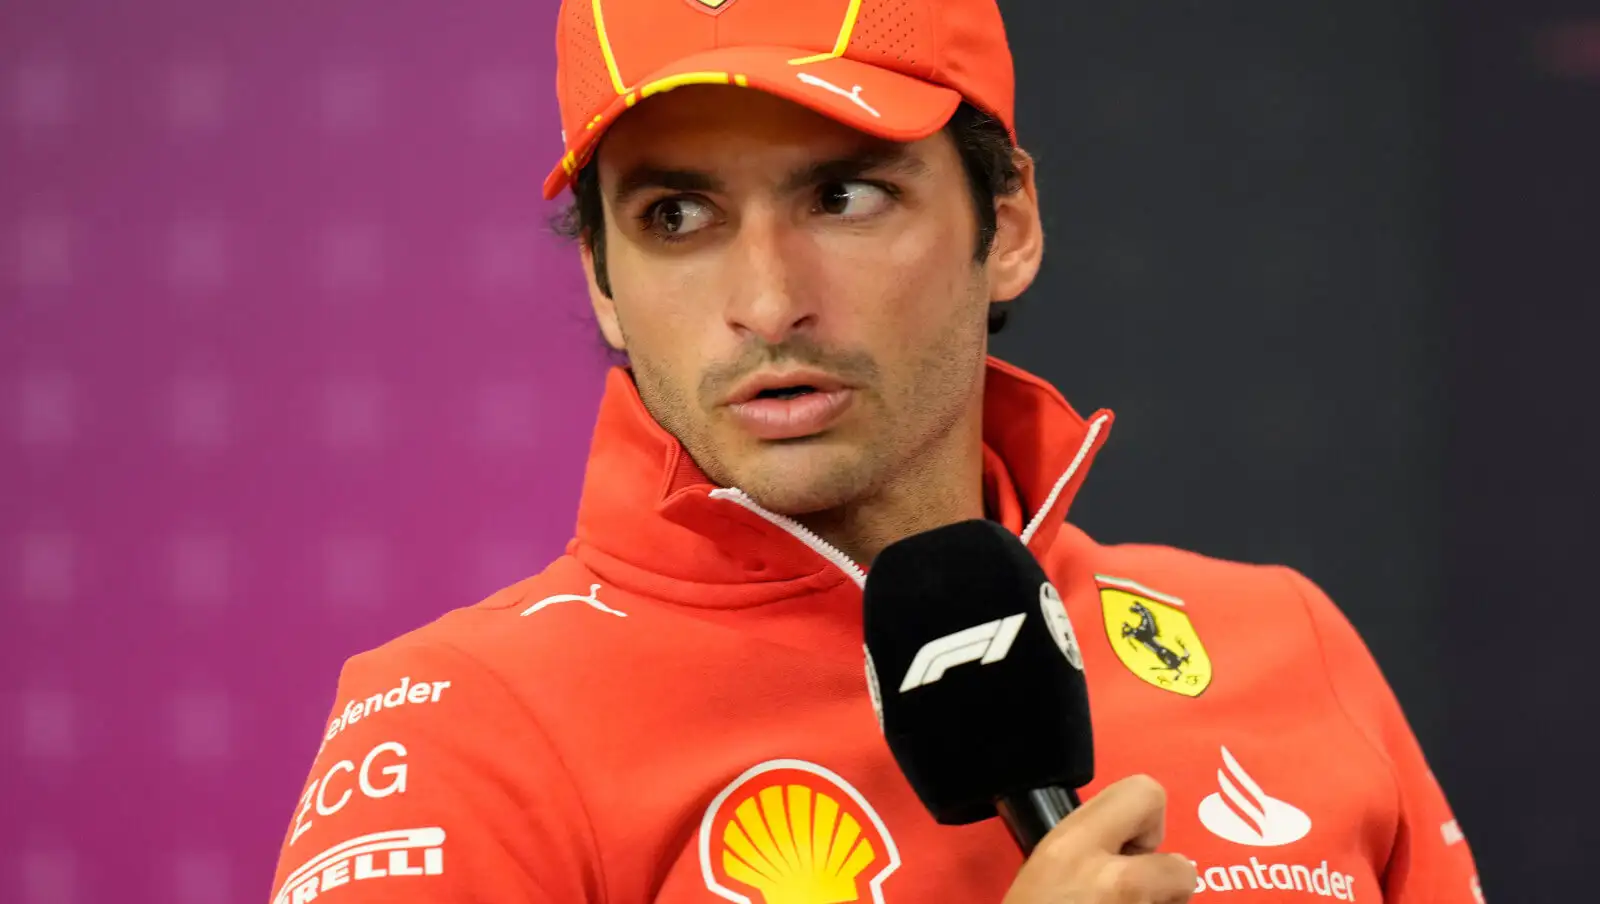 Carlos Sainz with the mic in the press conference.